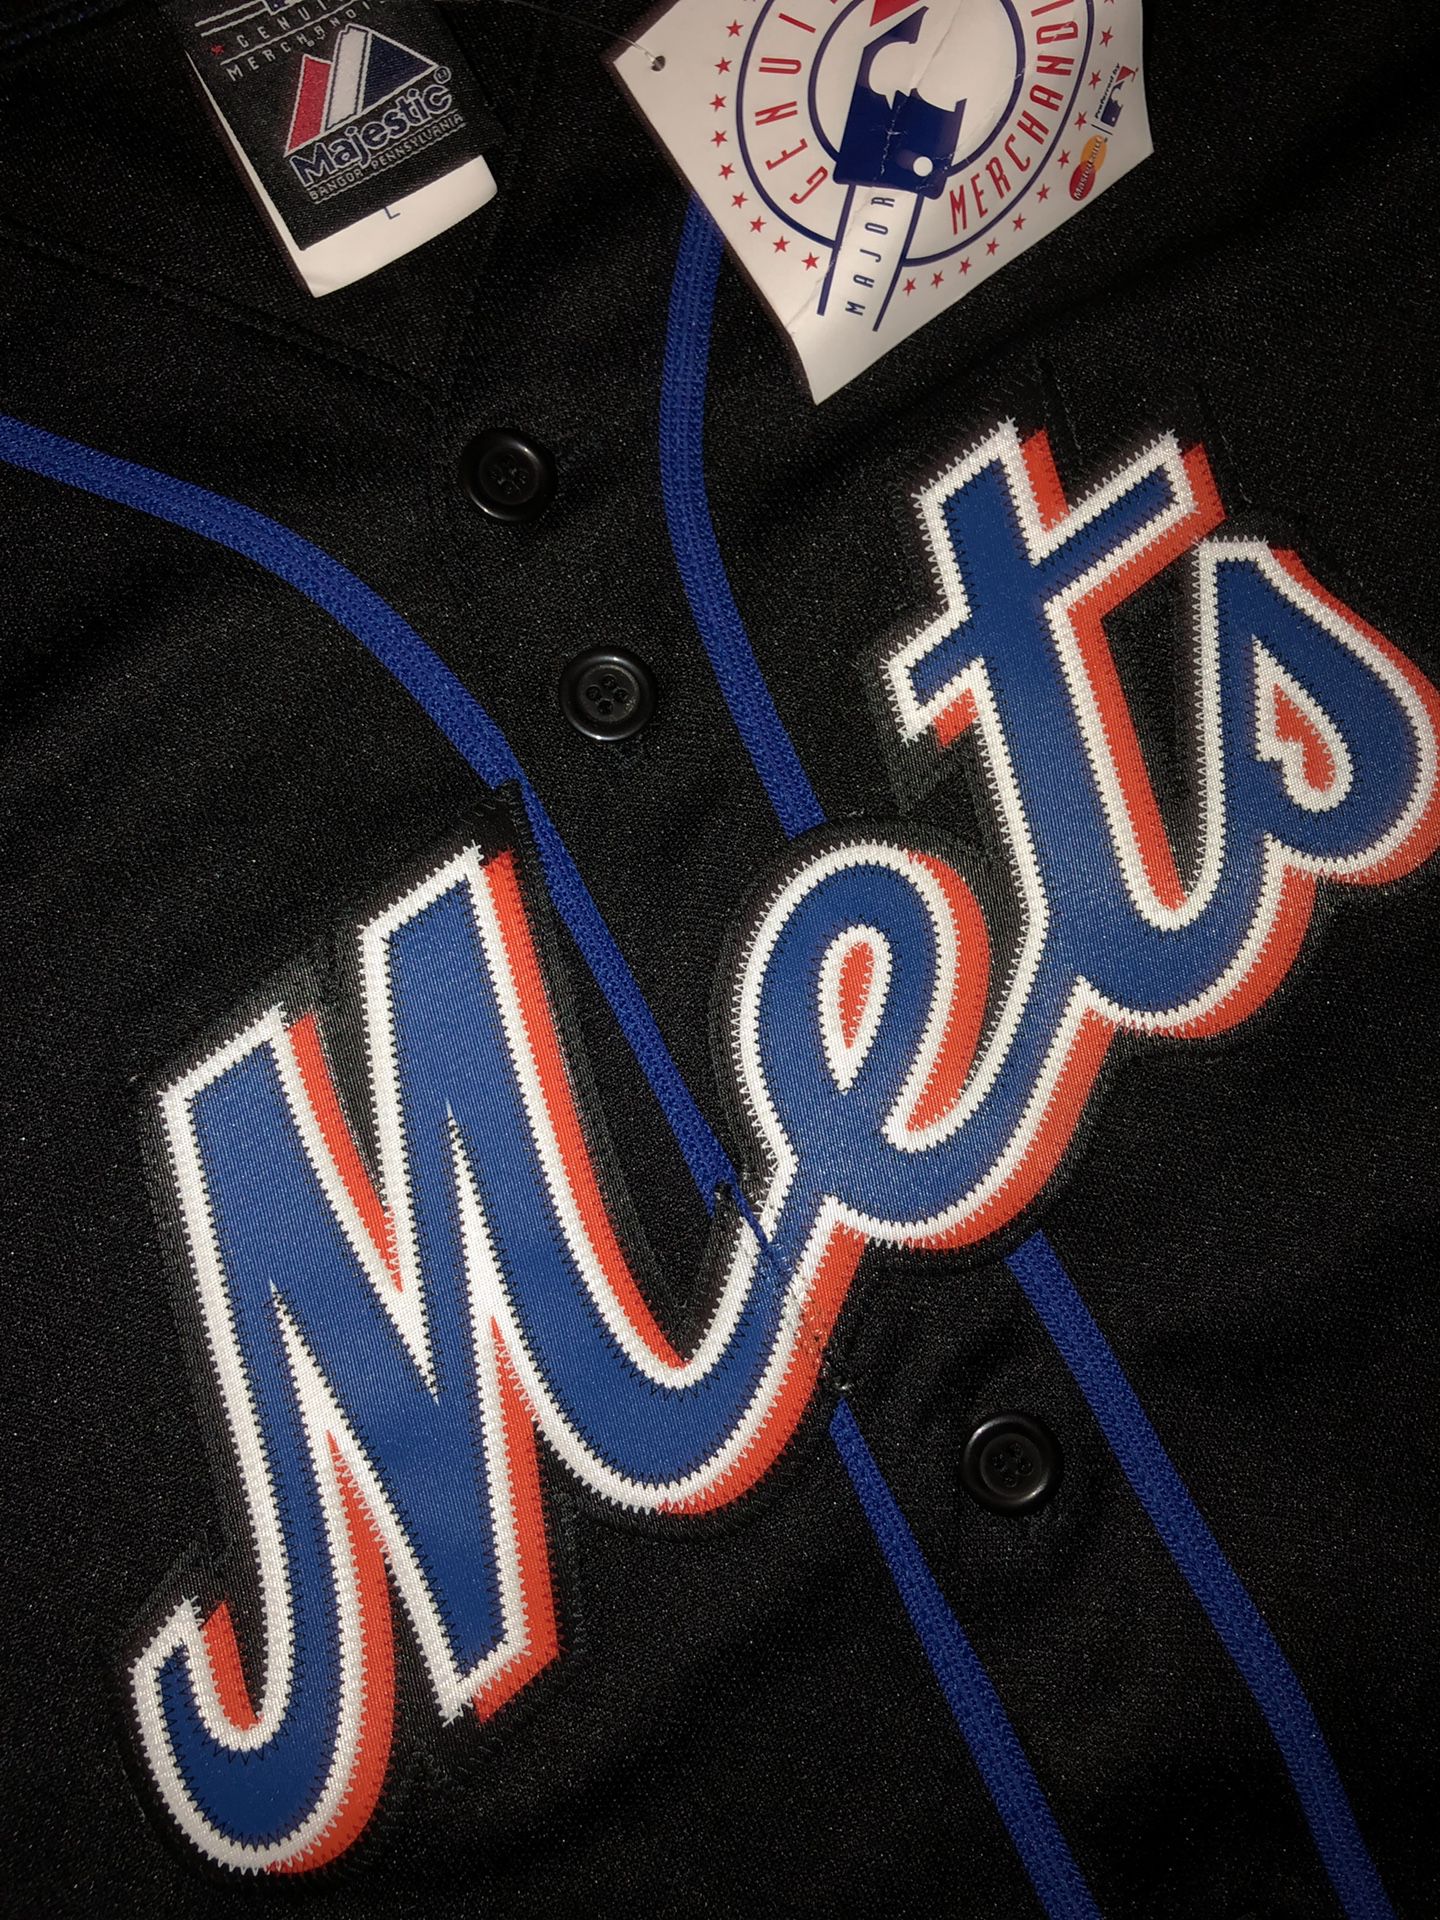 Nimmo #9 Mets Jersey for Sale in Hicksville, NY - OfferUp